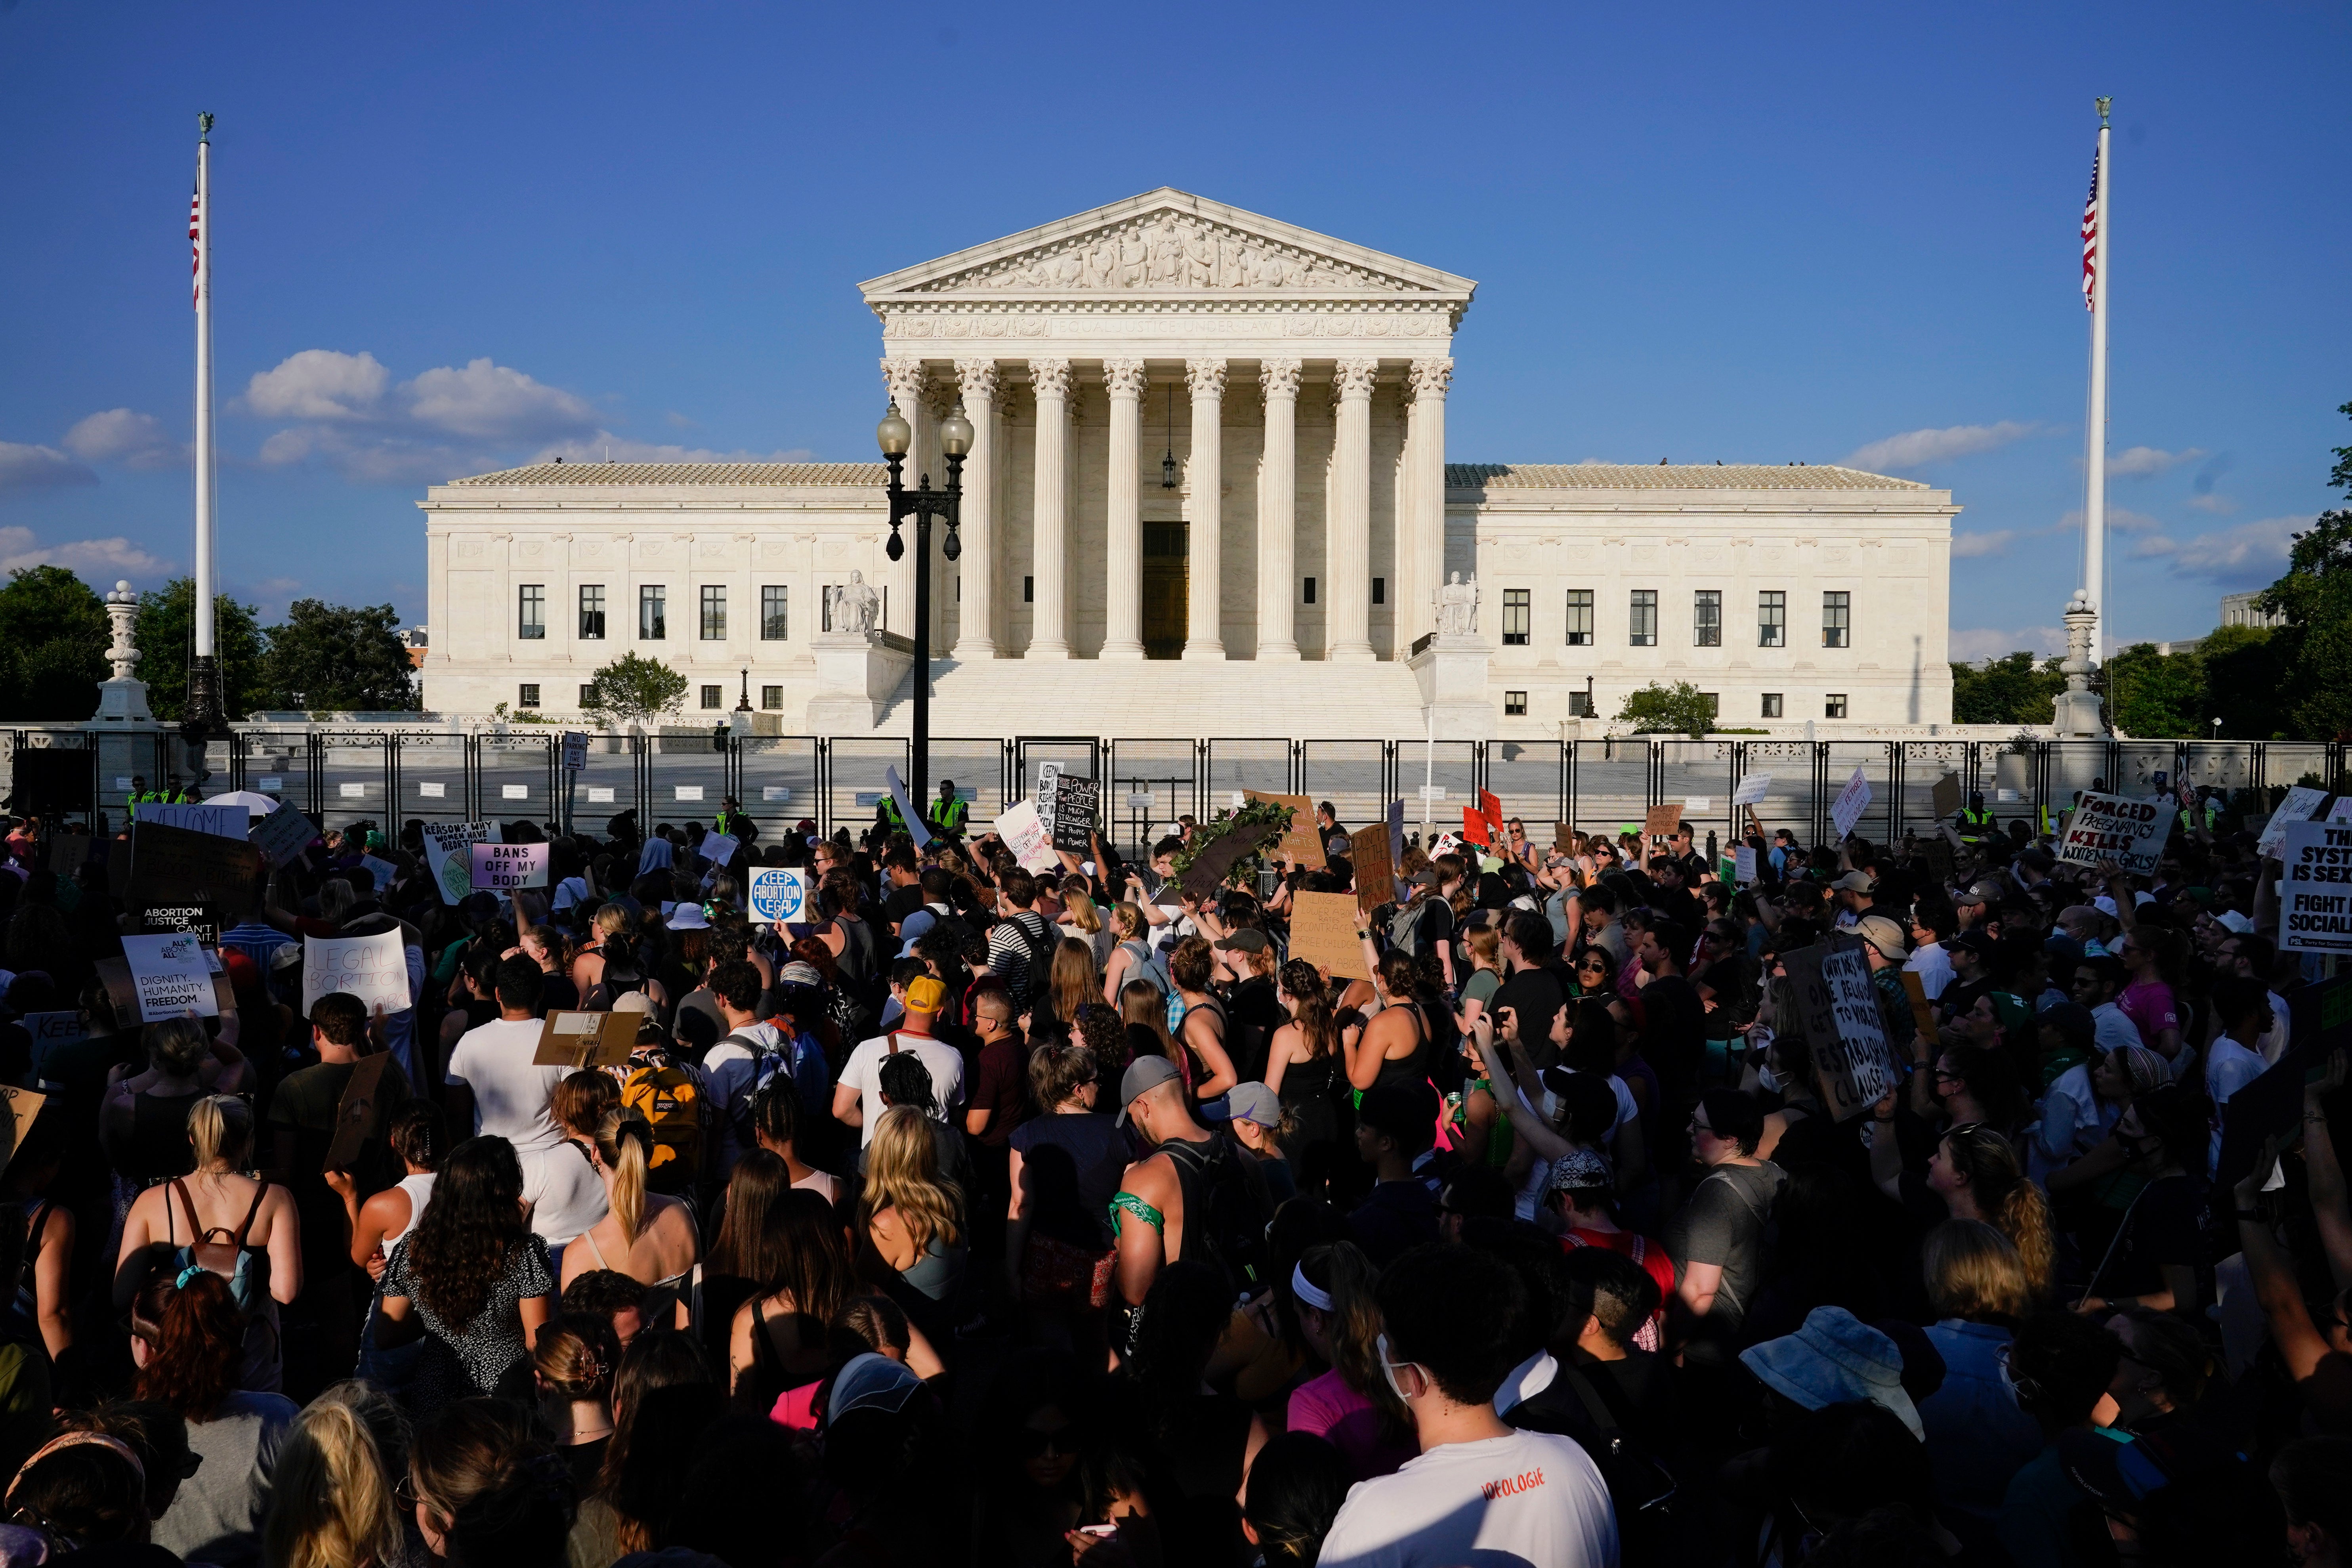 Protesters fill the street in front of the Supreme Court after the decision to overturn Roe v Wade